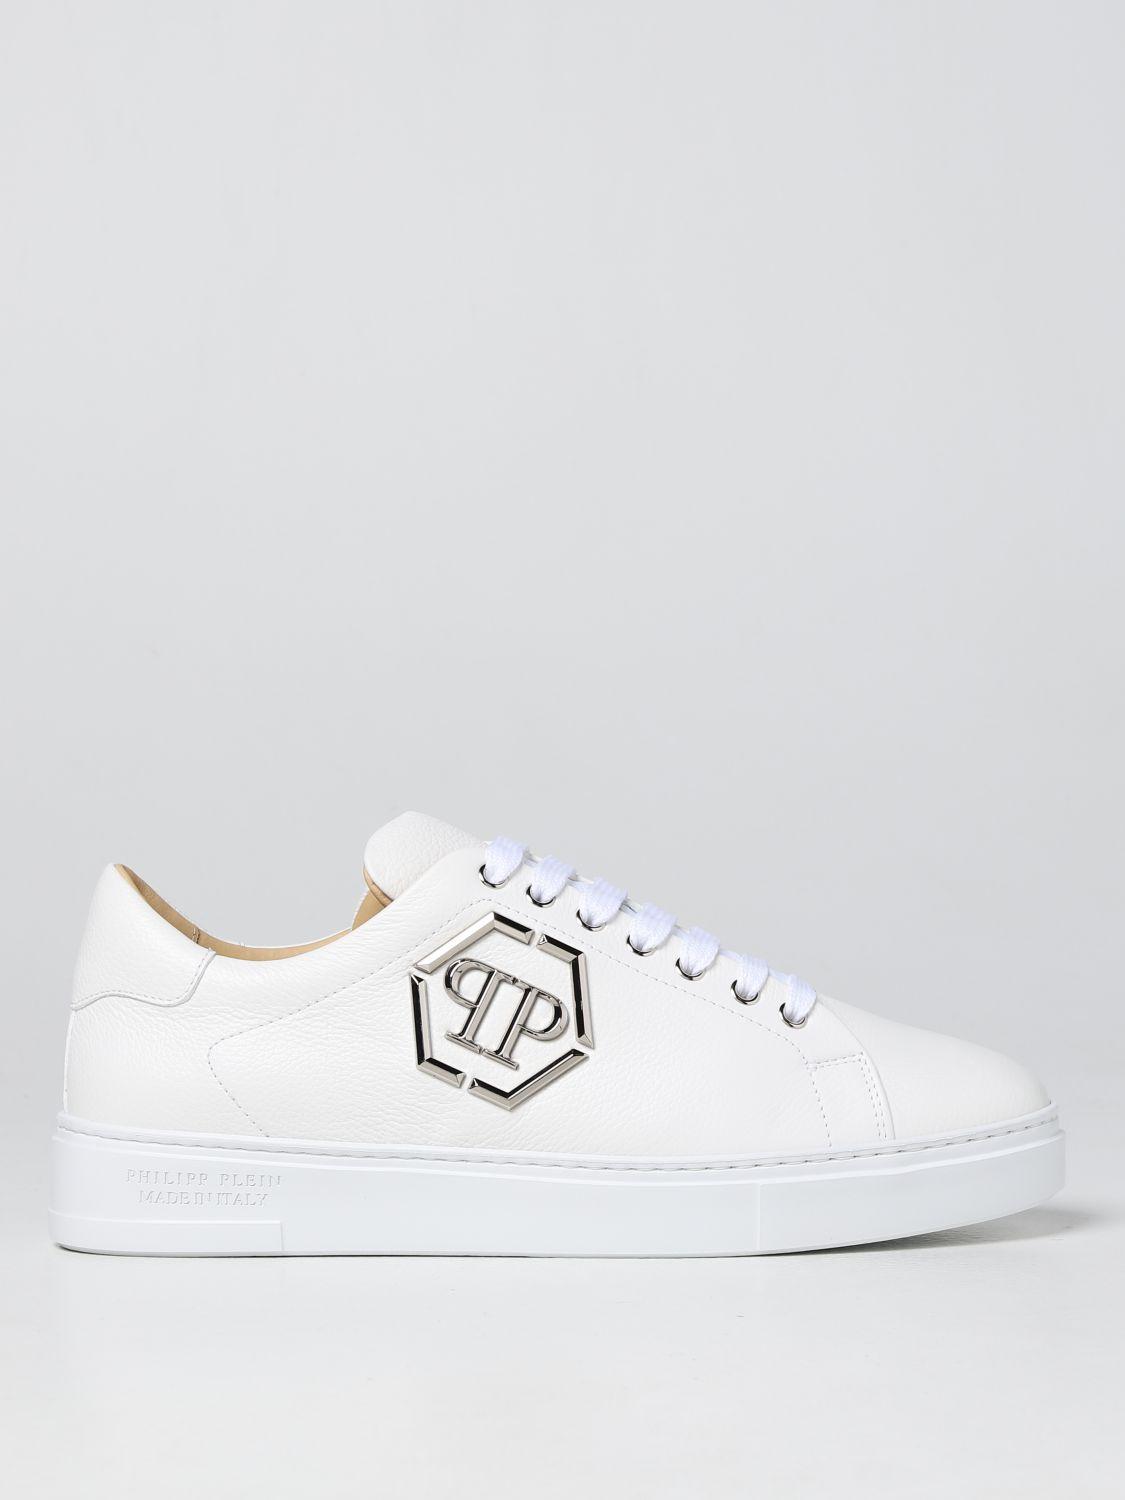 Mayor Yeah Amphibious Philipp Plein Sneakers In Grained Leather in White for Men | Lyst